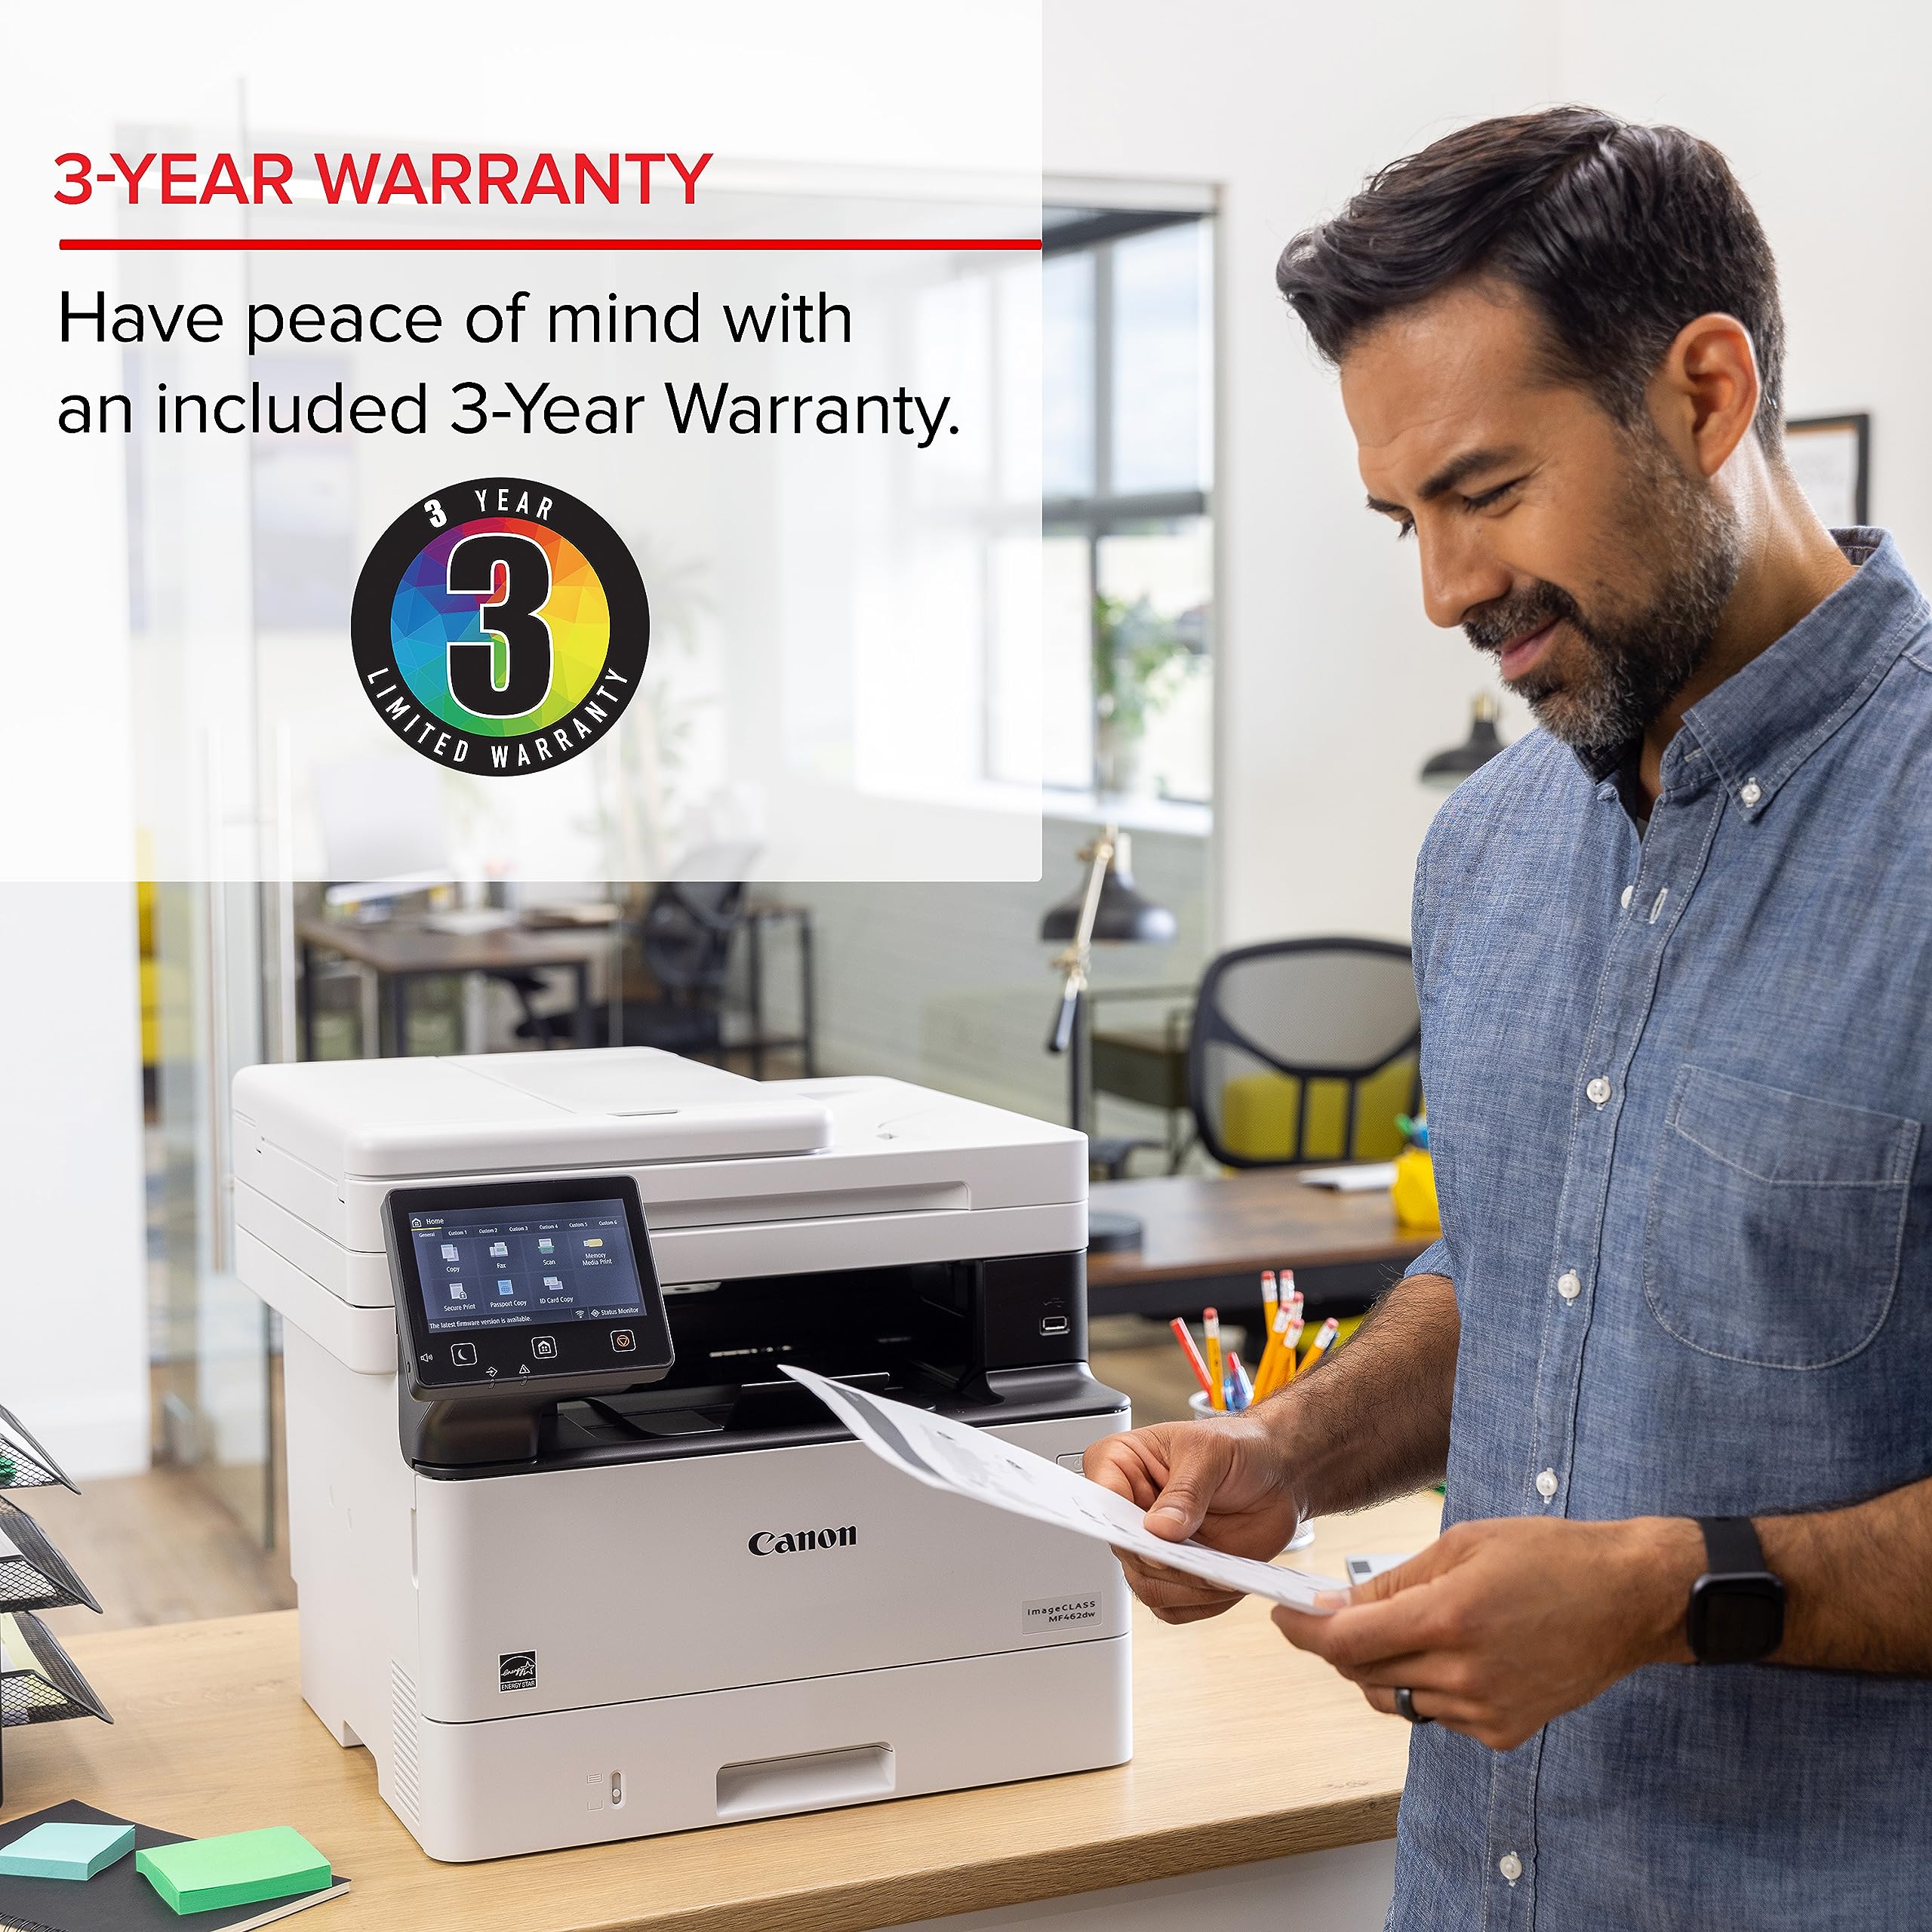 Canon imageCLASS MF462dw - All in One, Wireless, Mobile Ready, Duplex Laser Printer with Expandable Paper Capacity and 3 Year Limited Warranty